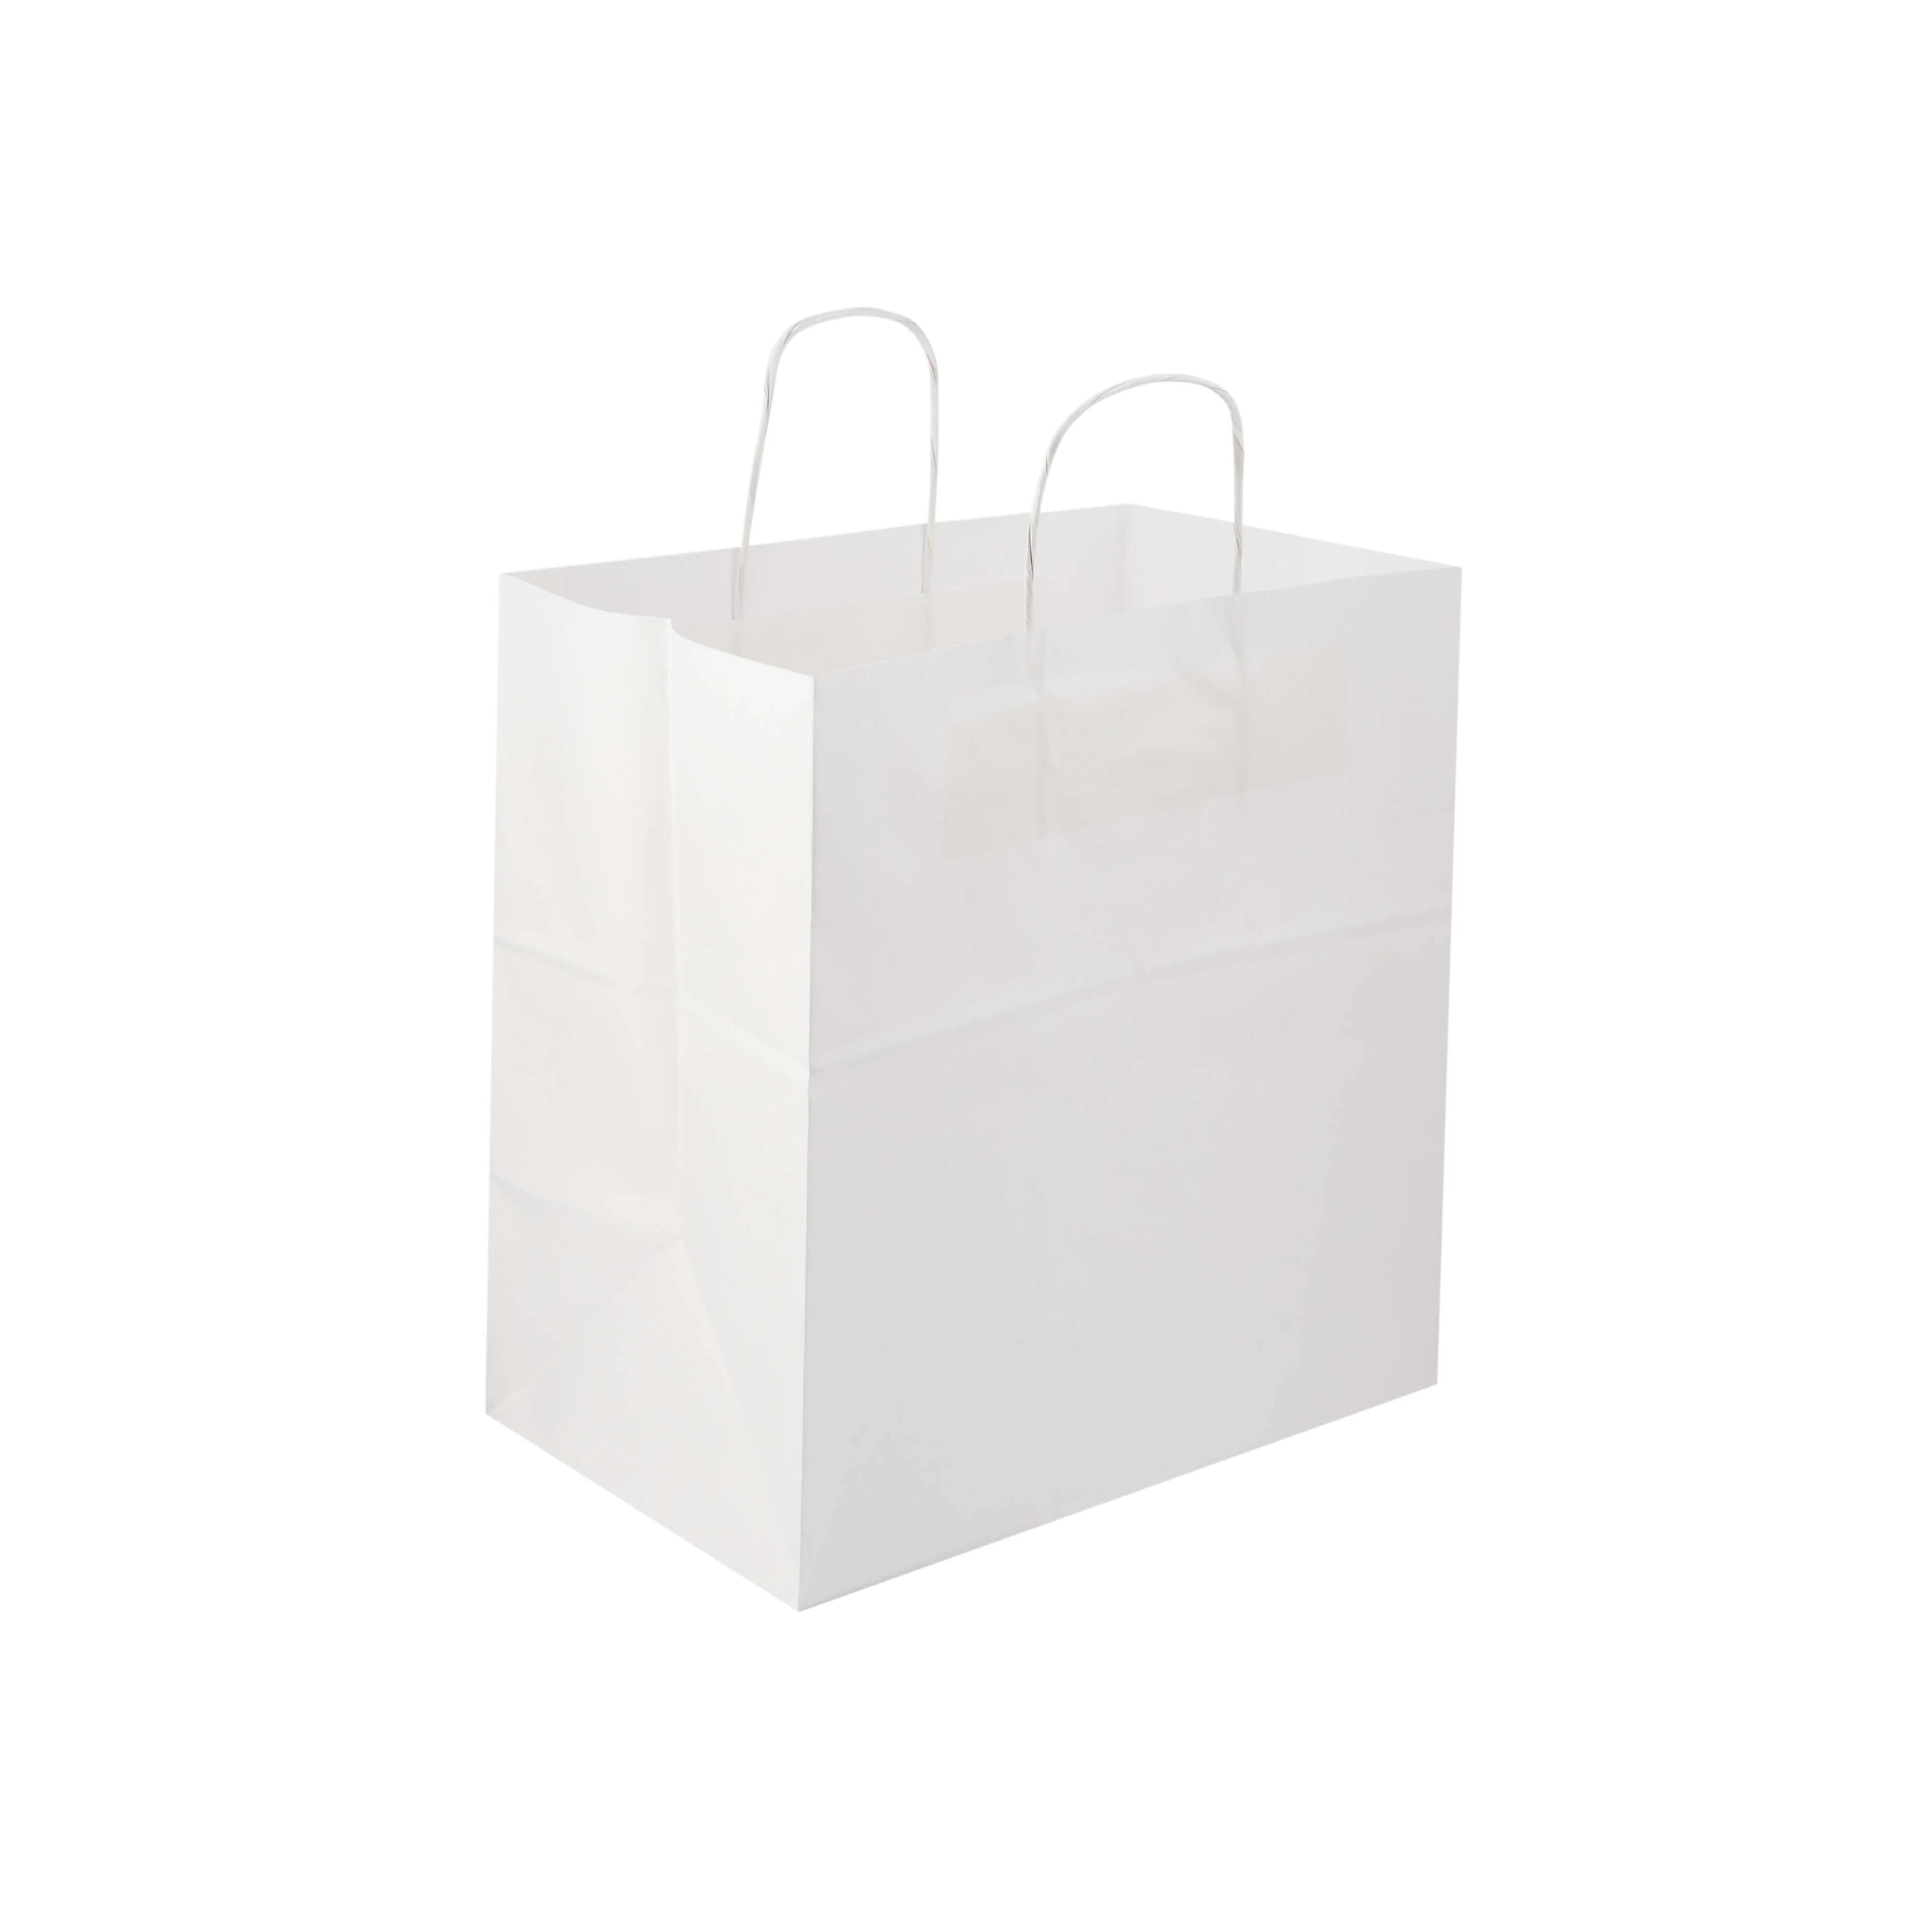 250 Pieces White Paper Bag With Twisted Handle 32x20x33 cm